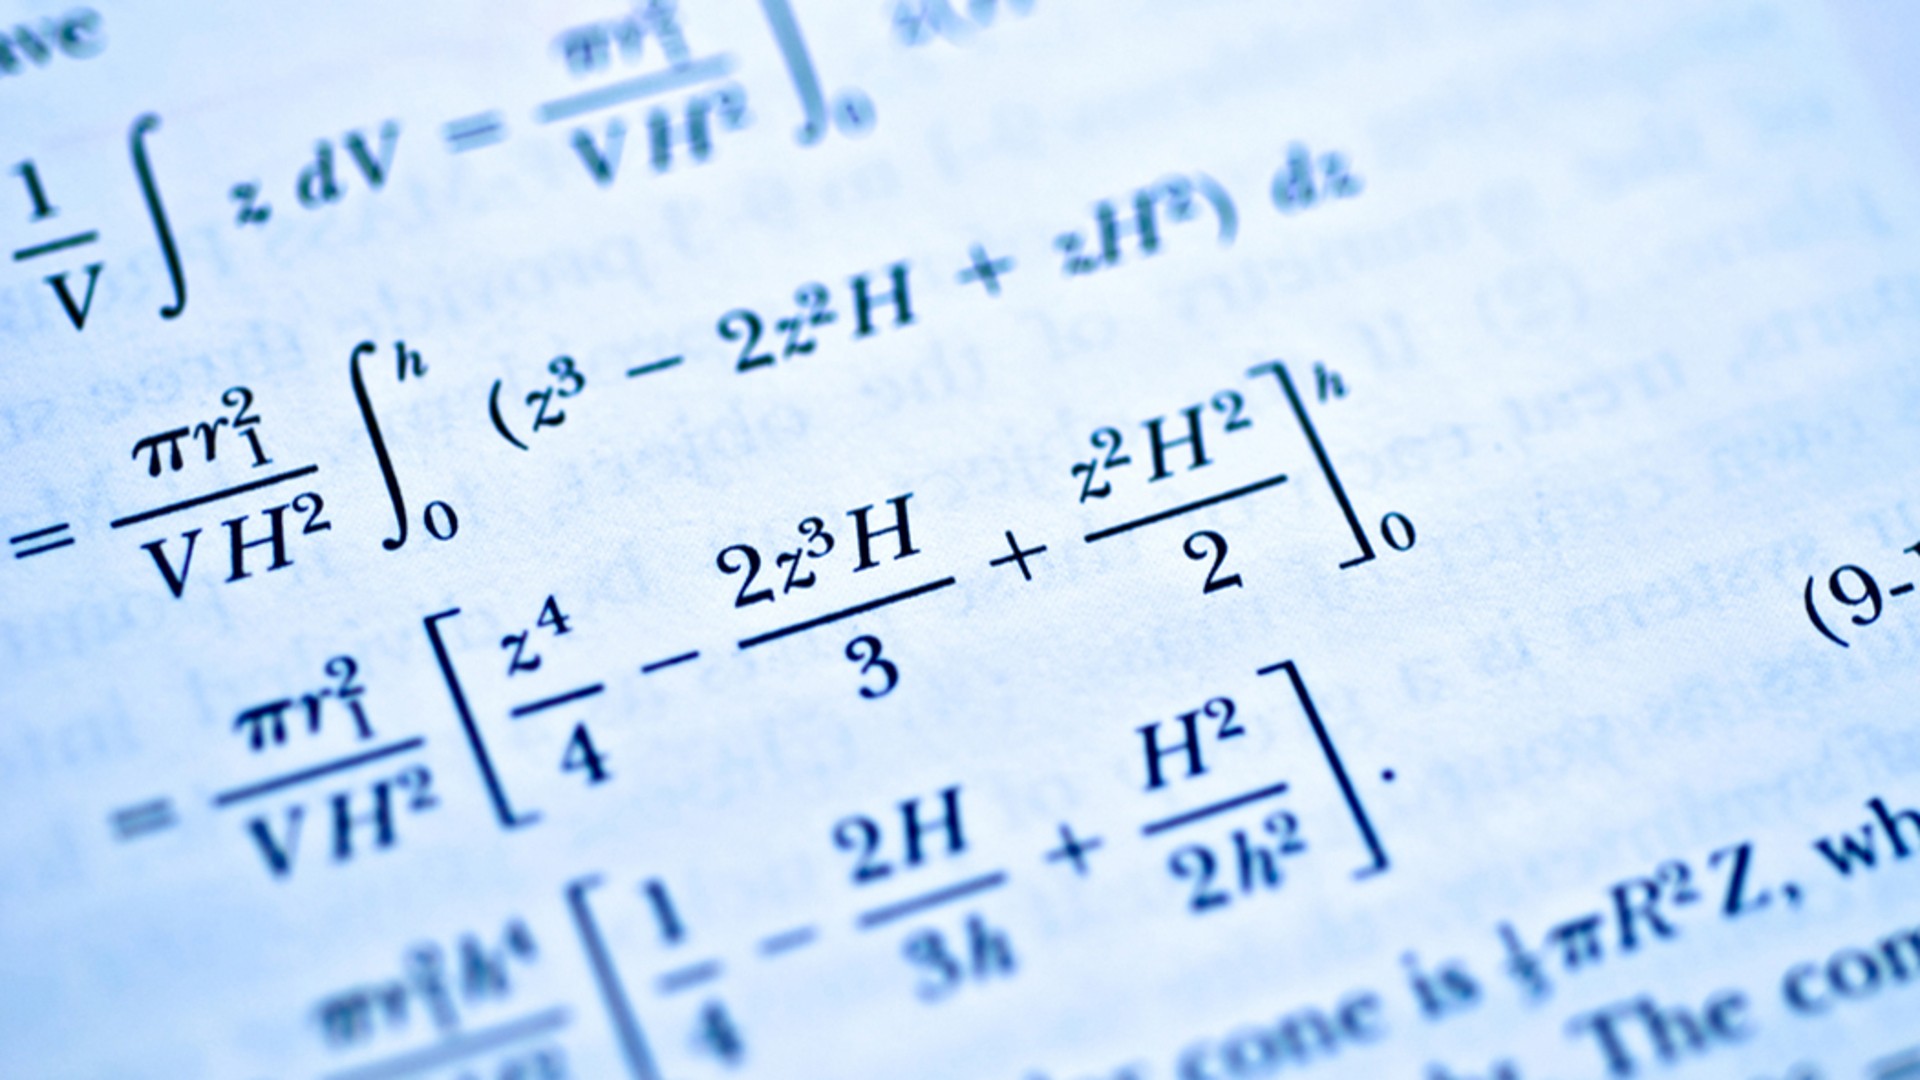 HSC Maths Past Papers - Featured Image